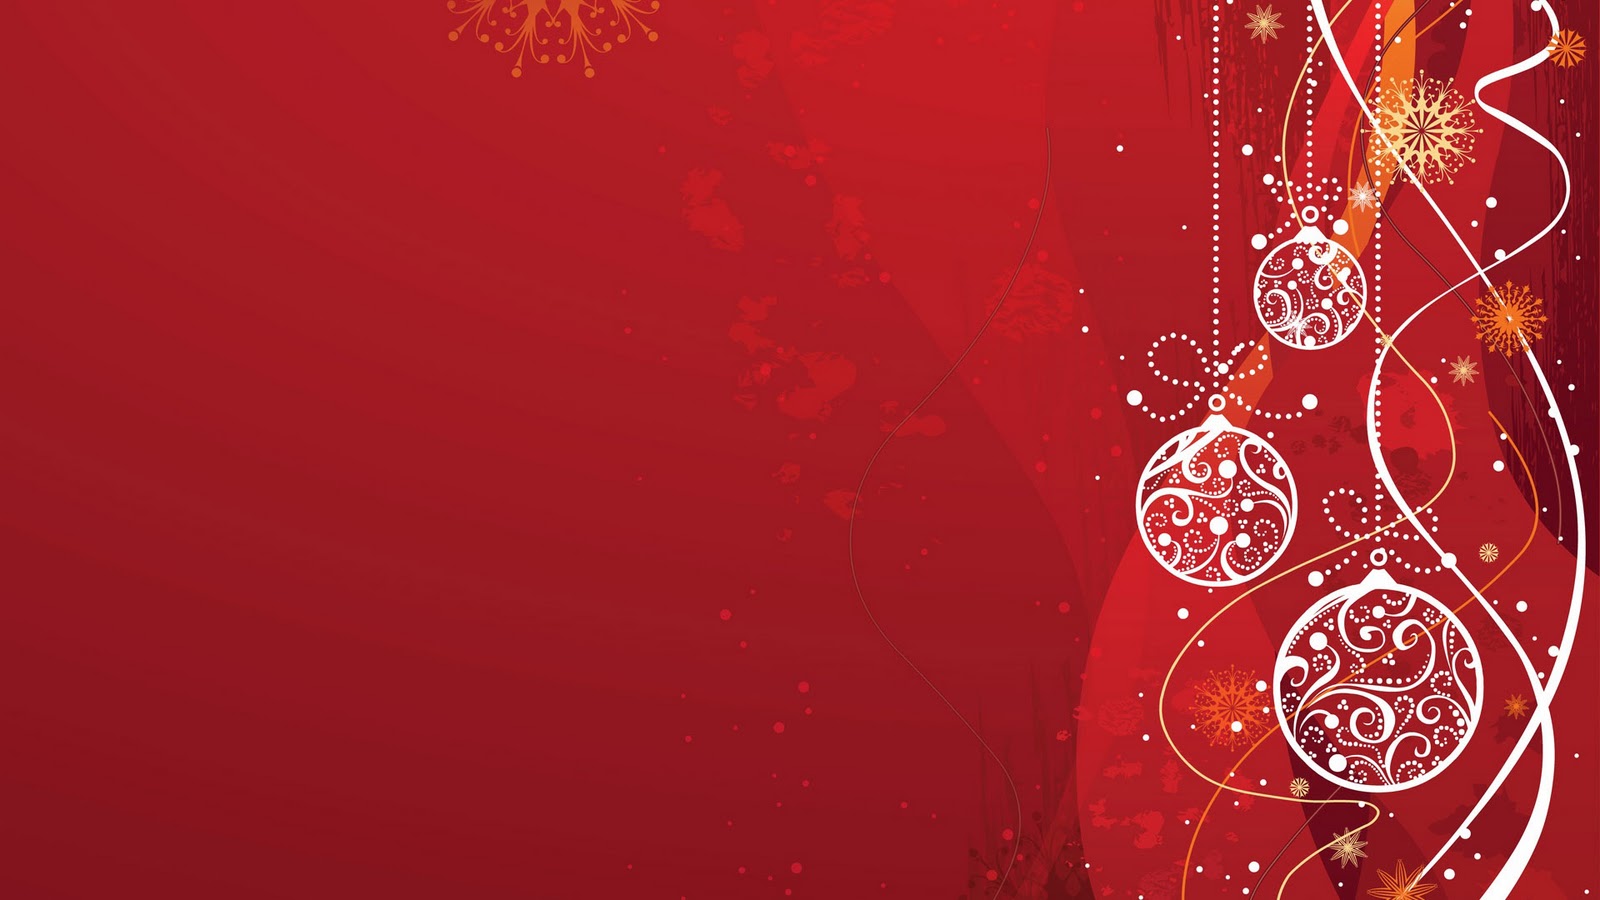 Christmas Background HD Wallpaper9 For